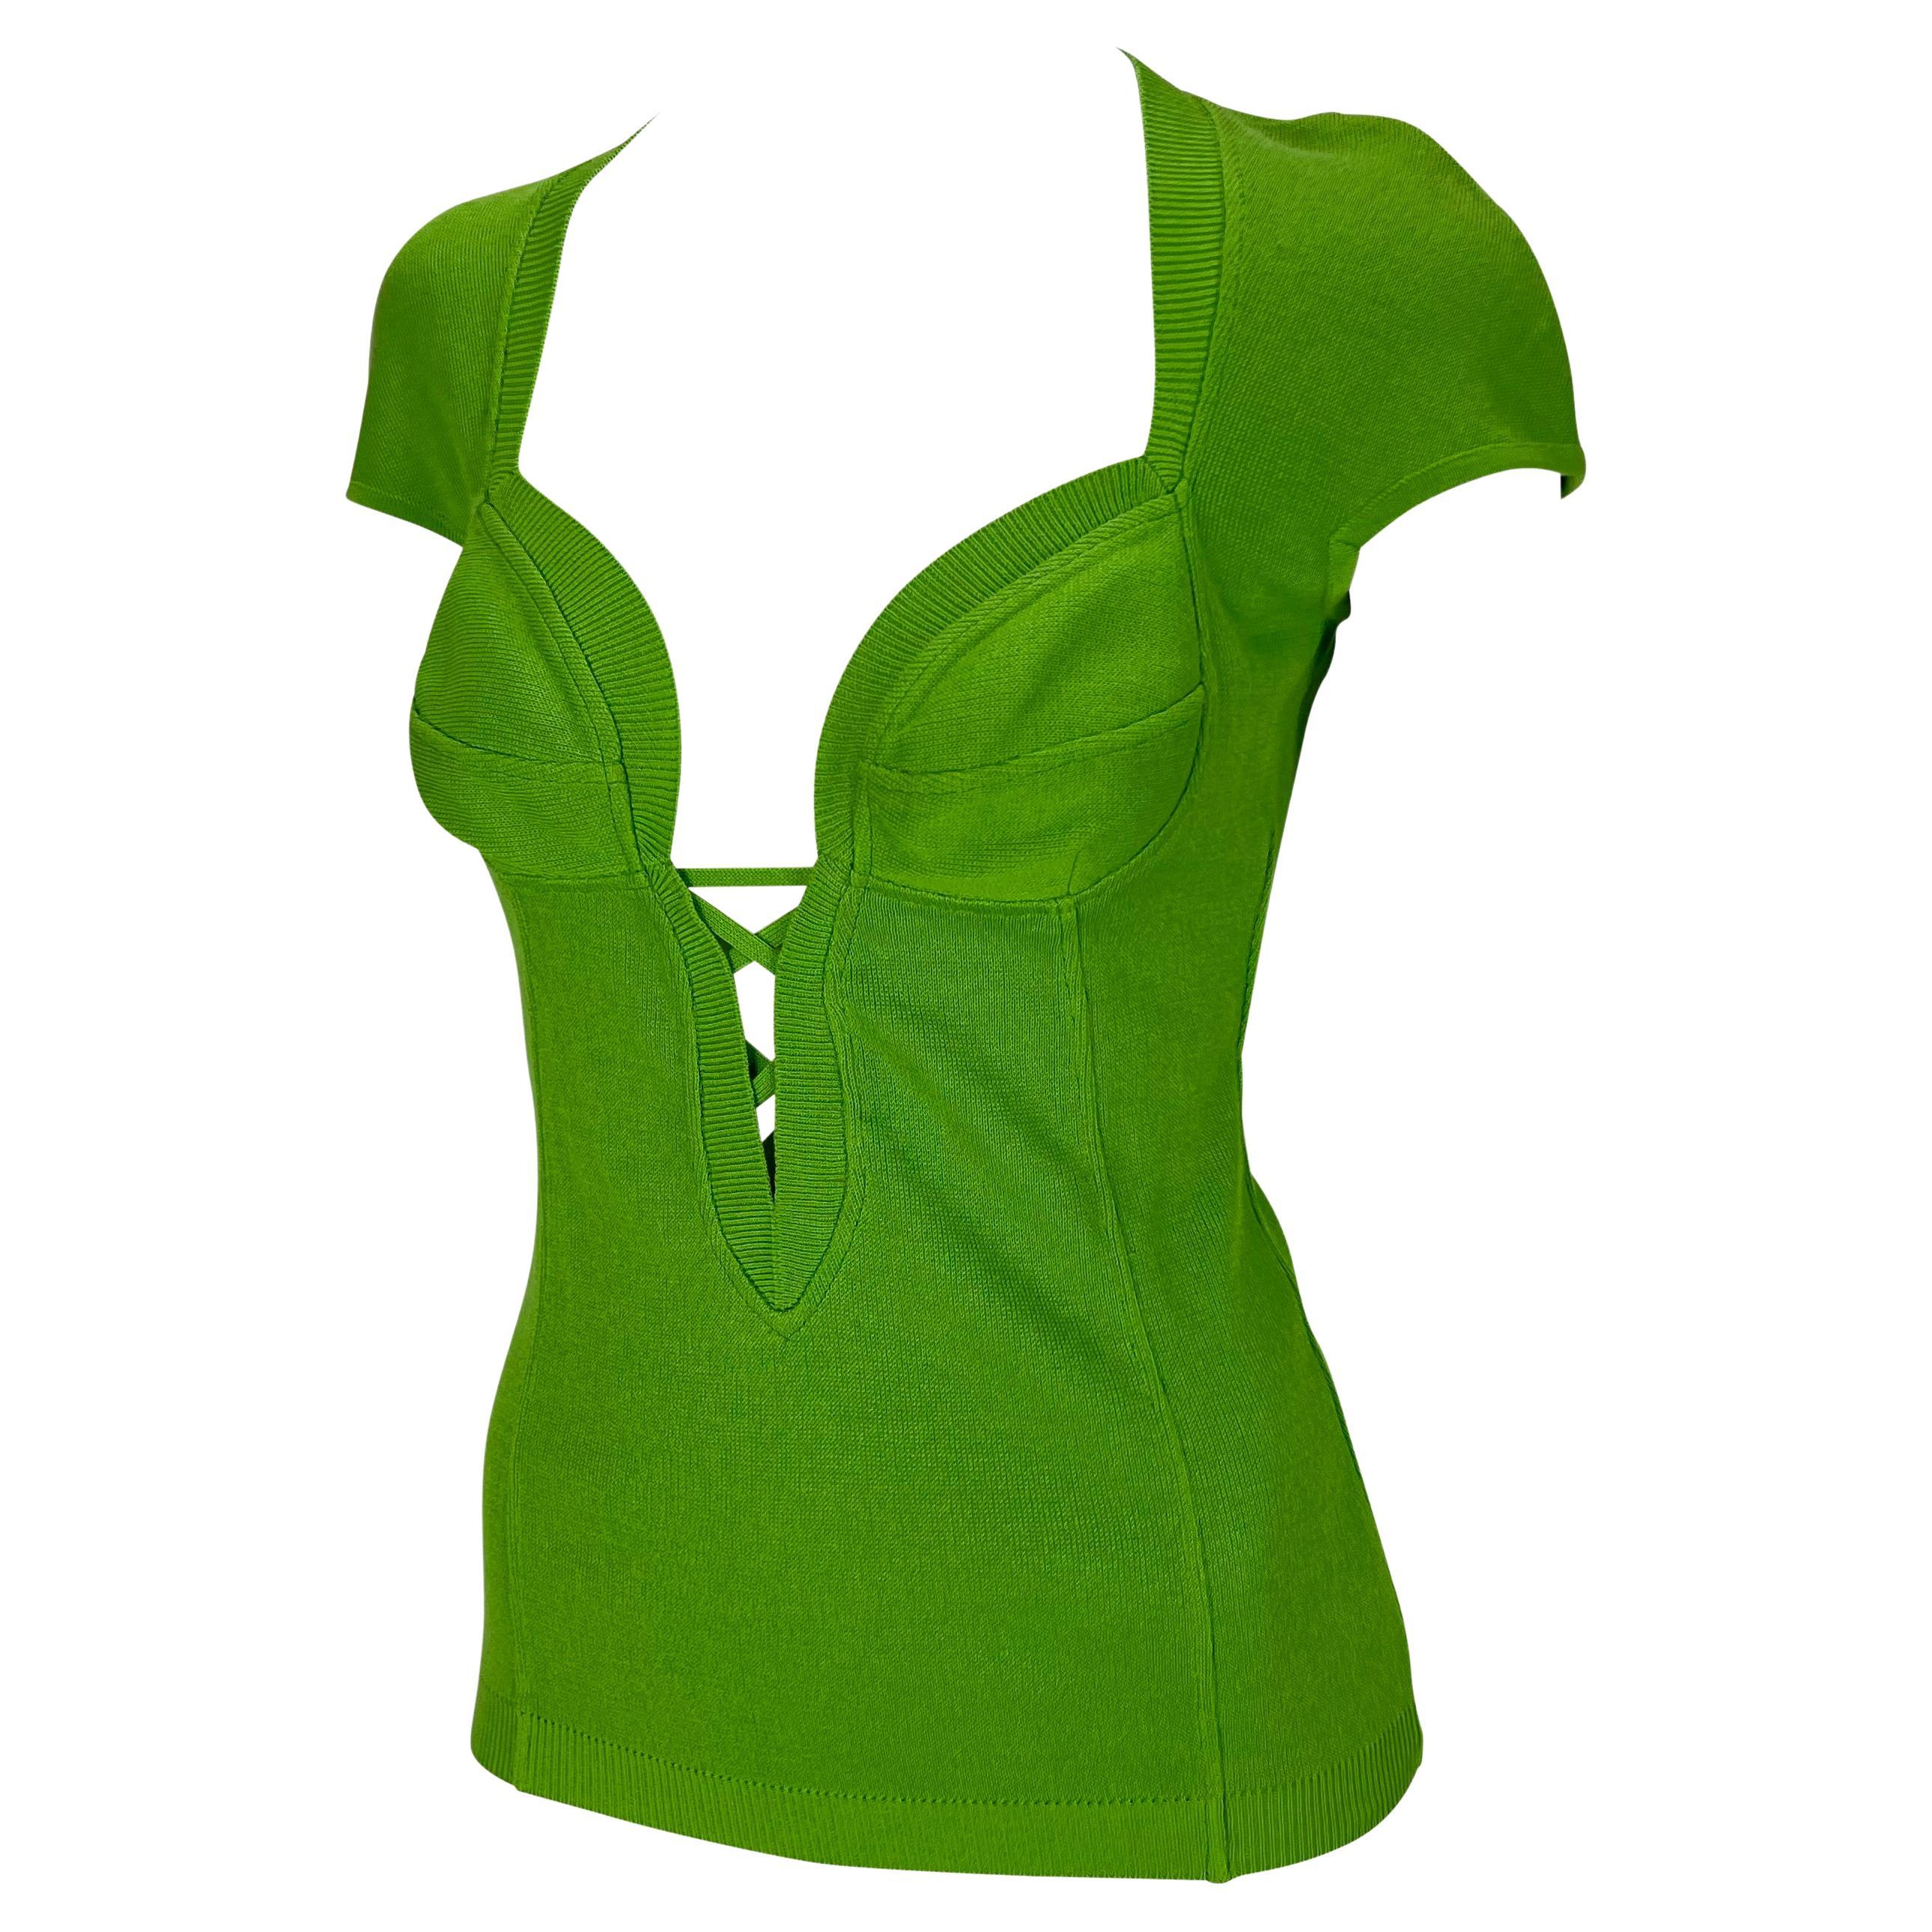 TheRealList presents: a fabulous vibrant green Gianni Versace knit top, designed by Gianni Versace. From the Spring/Summer 1993 collection, this stunning top features a unique and intricate neckline, petal sleeves, and a lace detail below the padded